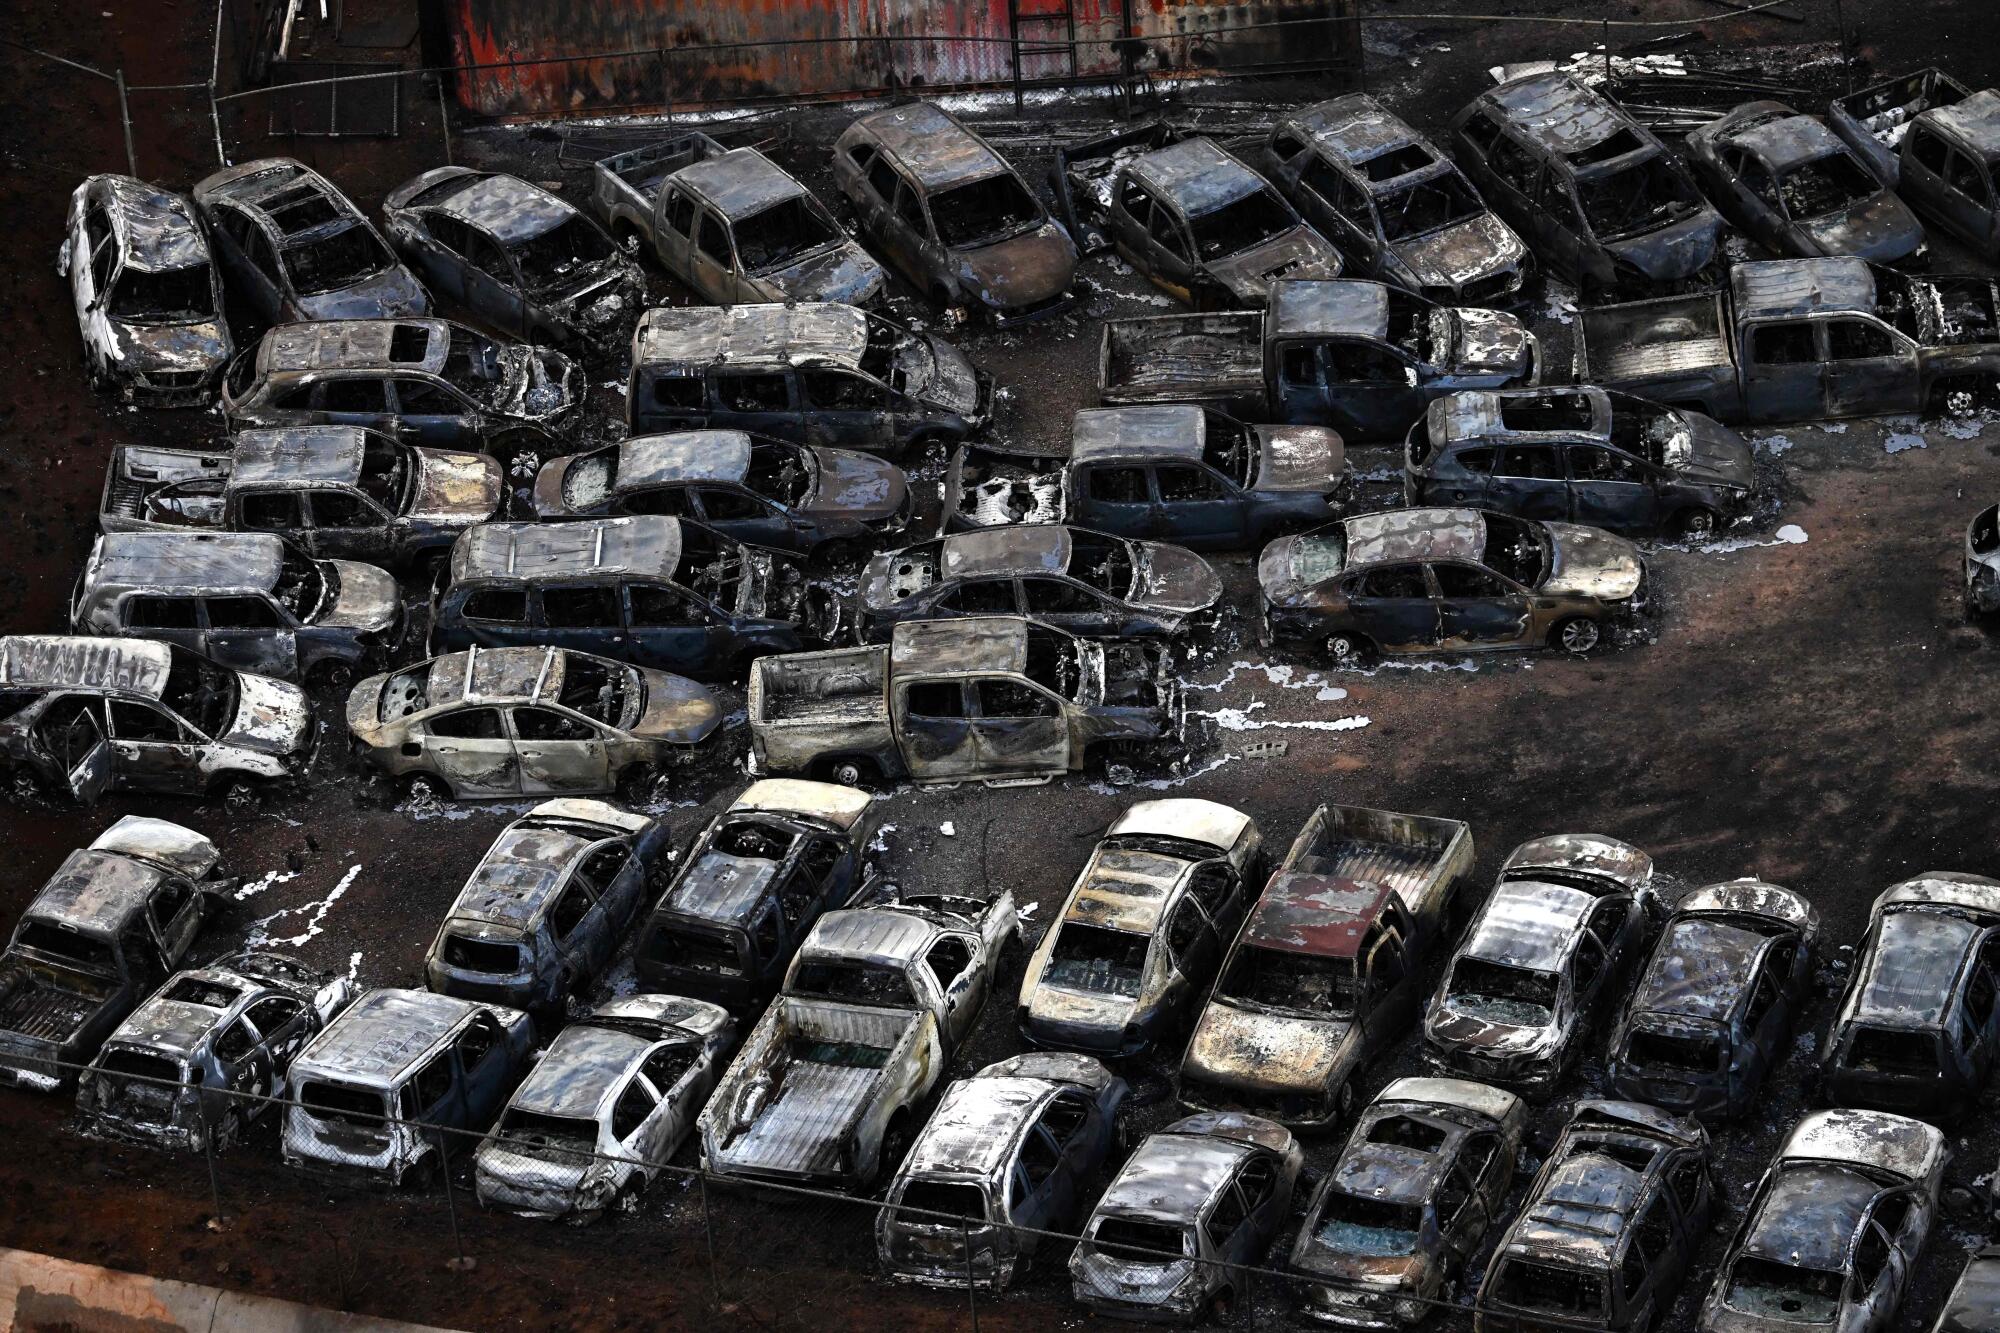 An aerial image shows destroyed cars in the aftermath of wildfires.